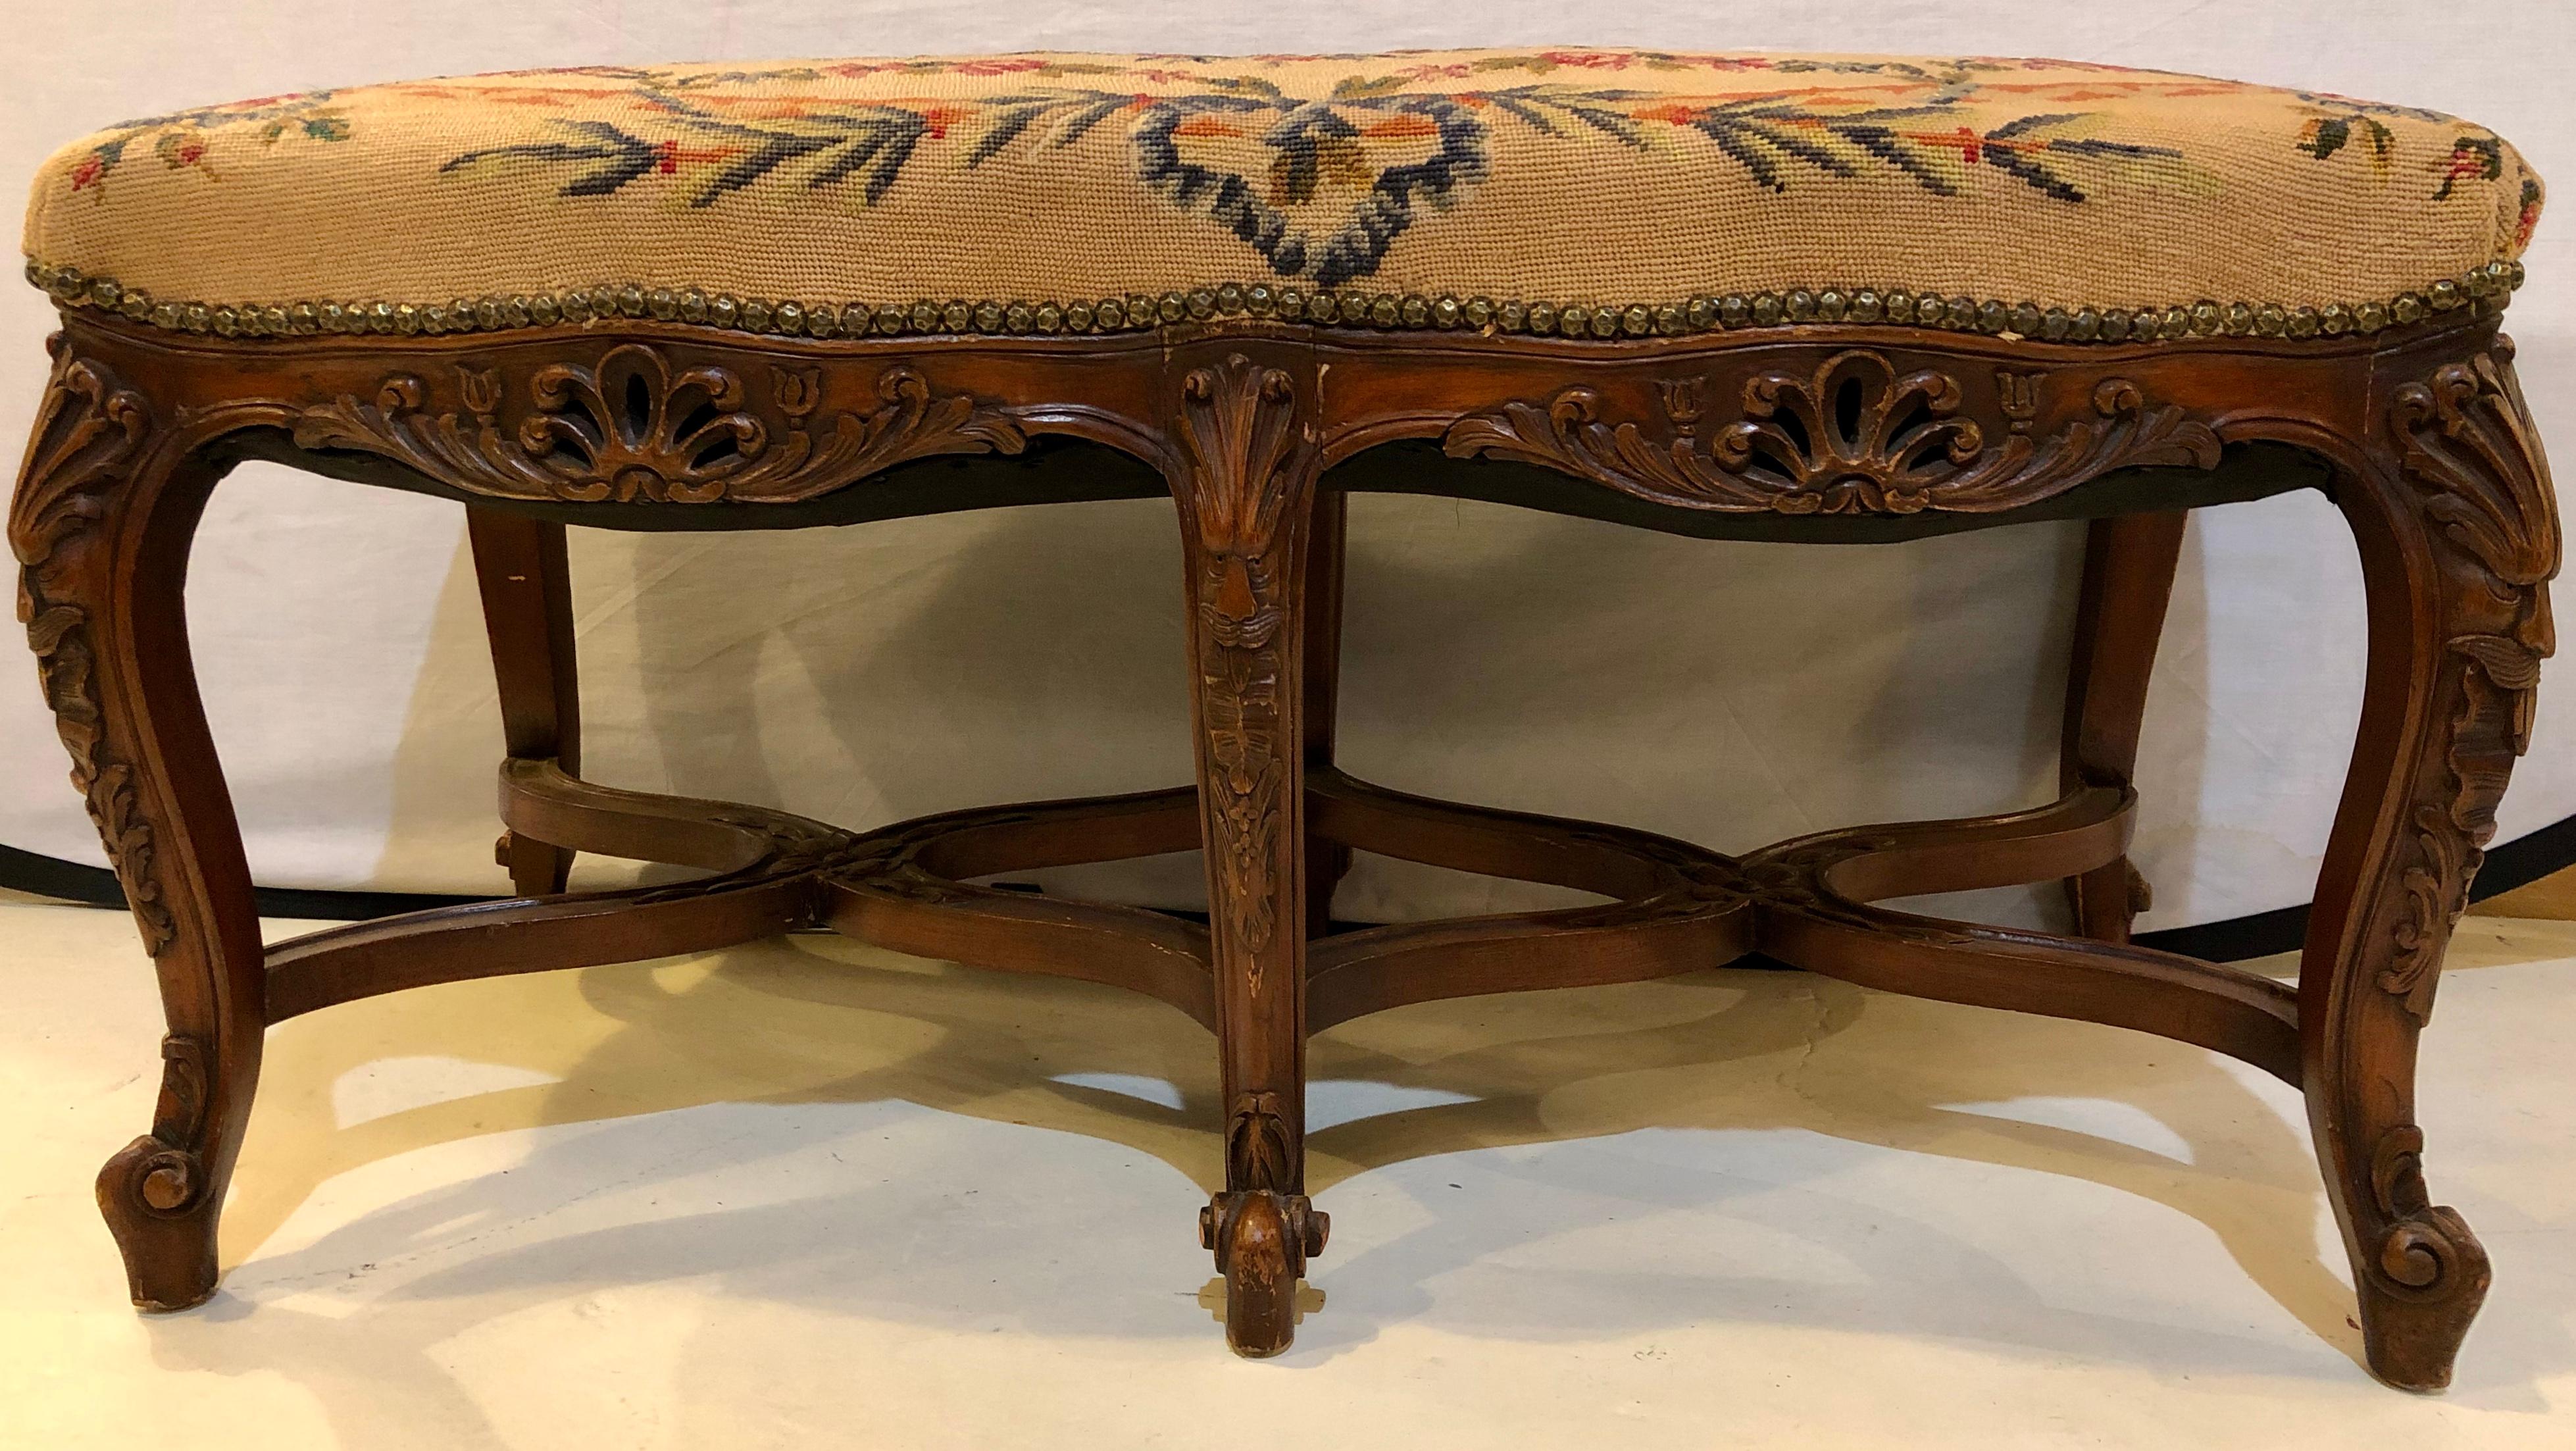 A needlepoint Louis XV style window bench or footstool. A French finely carved frame in the Louis XV fashion having six legs and an X-form undercarriage connecting all. The fabric is a hand needlepoint.


SX.